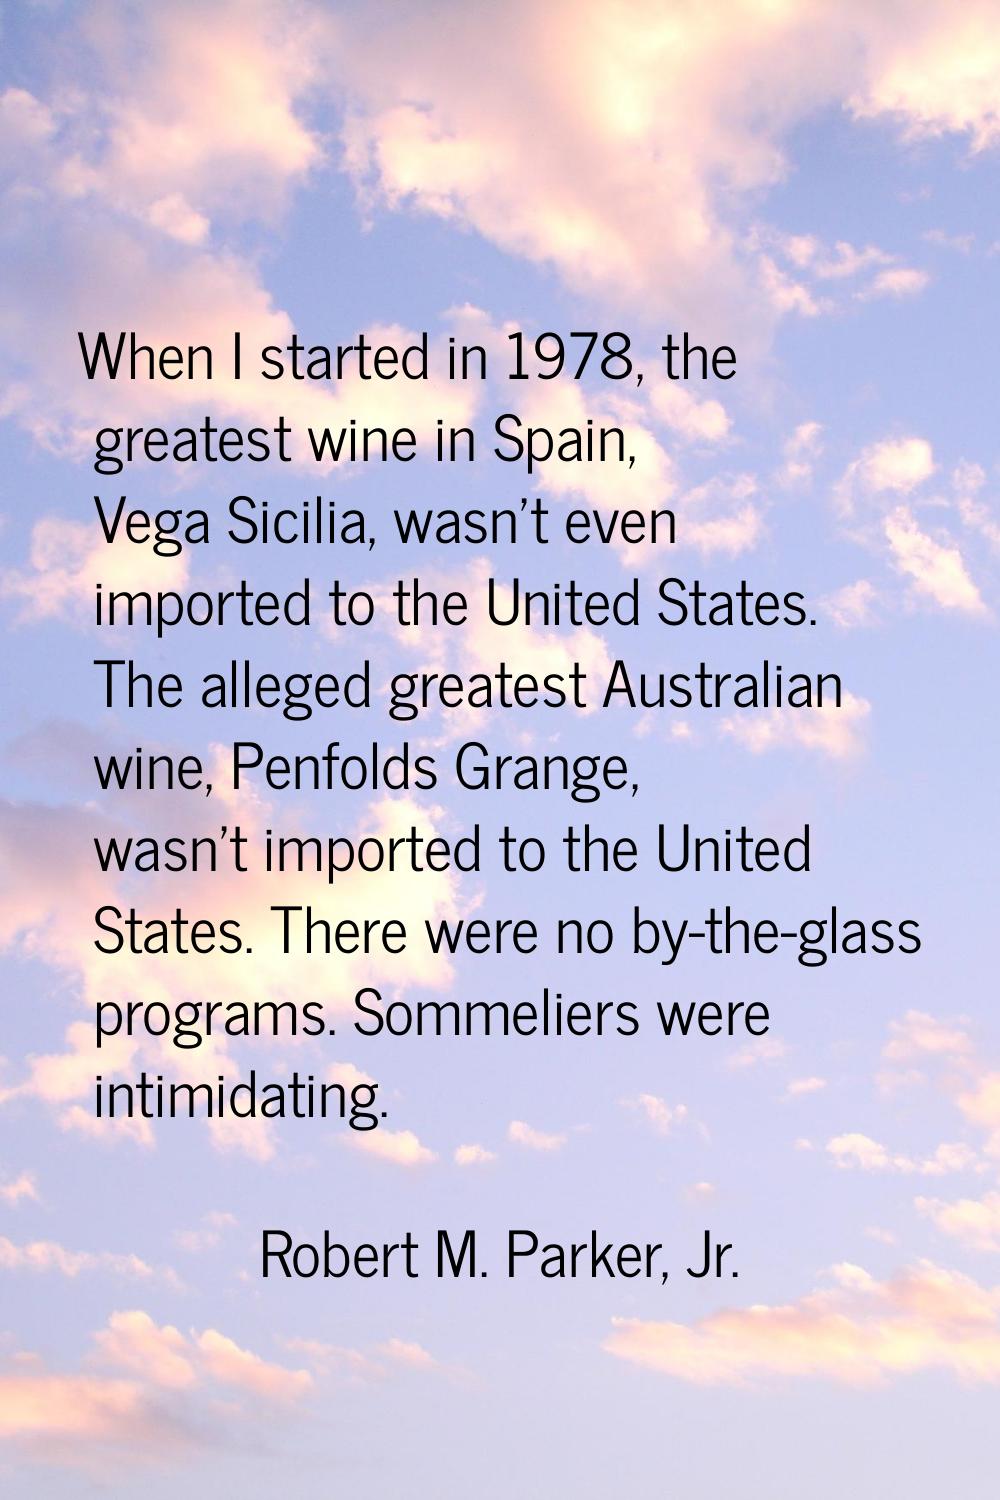 When I started in 1978, the greatest wine in Spain, Vega Sicilia, wasn't even imported to the Unite